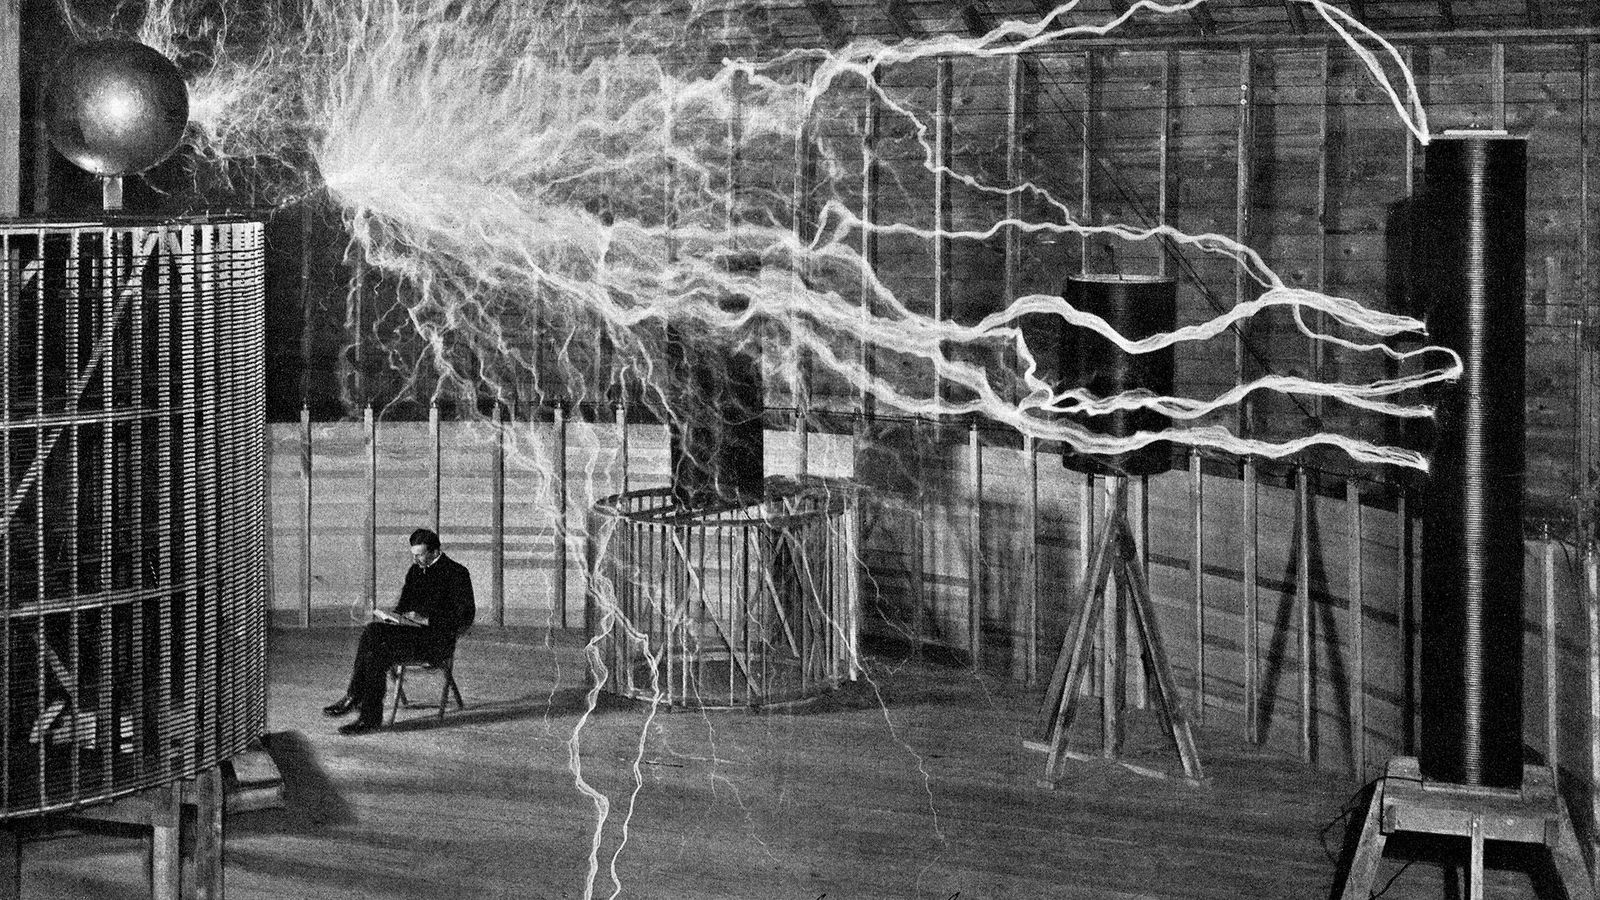 Edison and Tesla's cutthroat 'Current War' ushered in the electric age